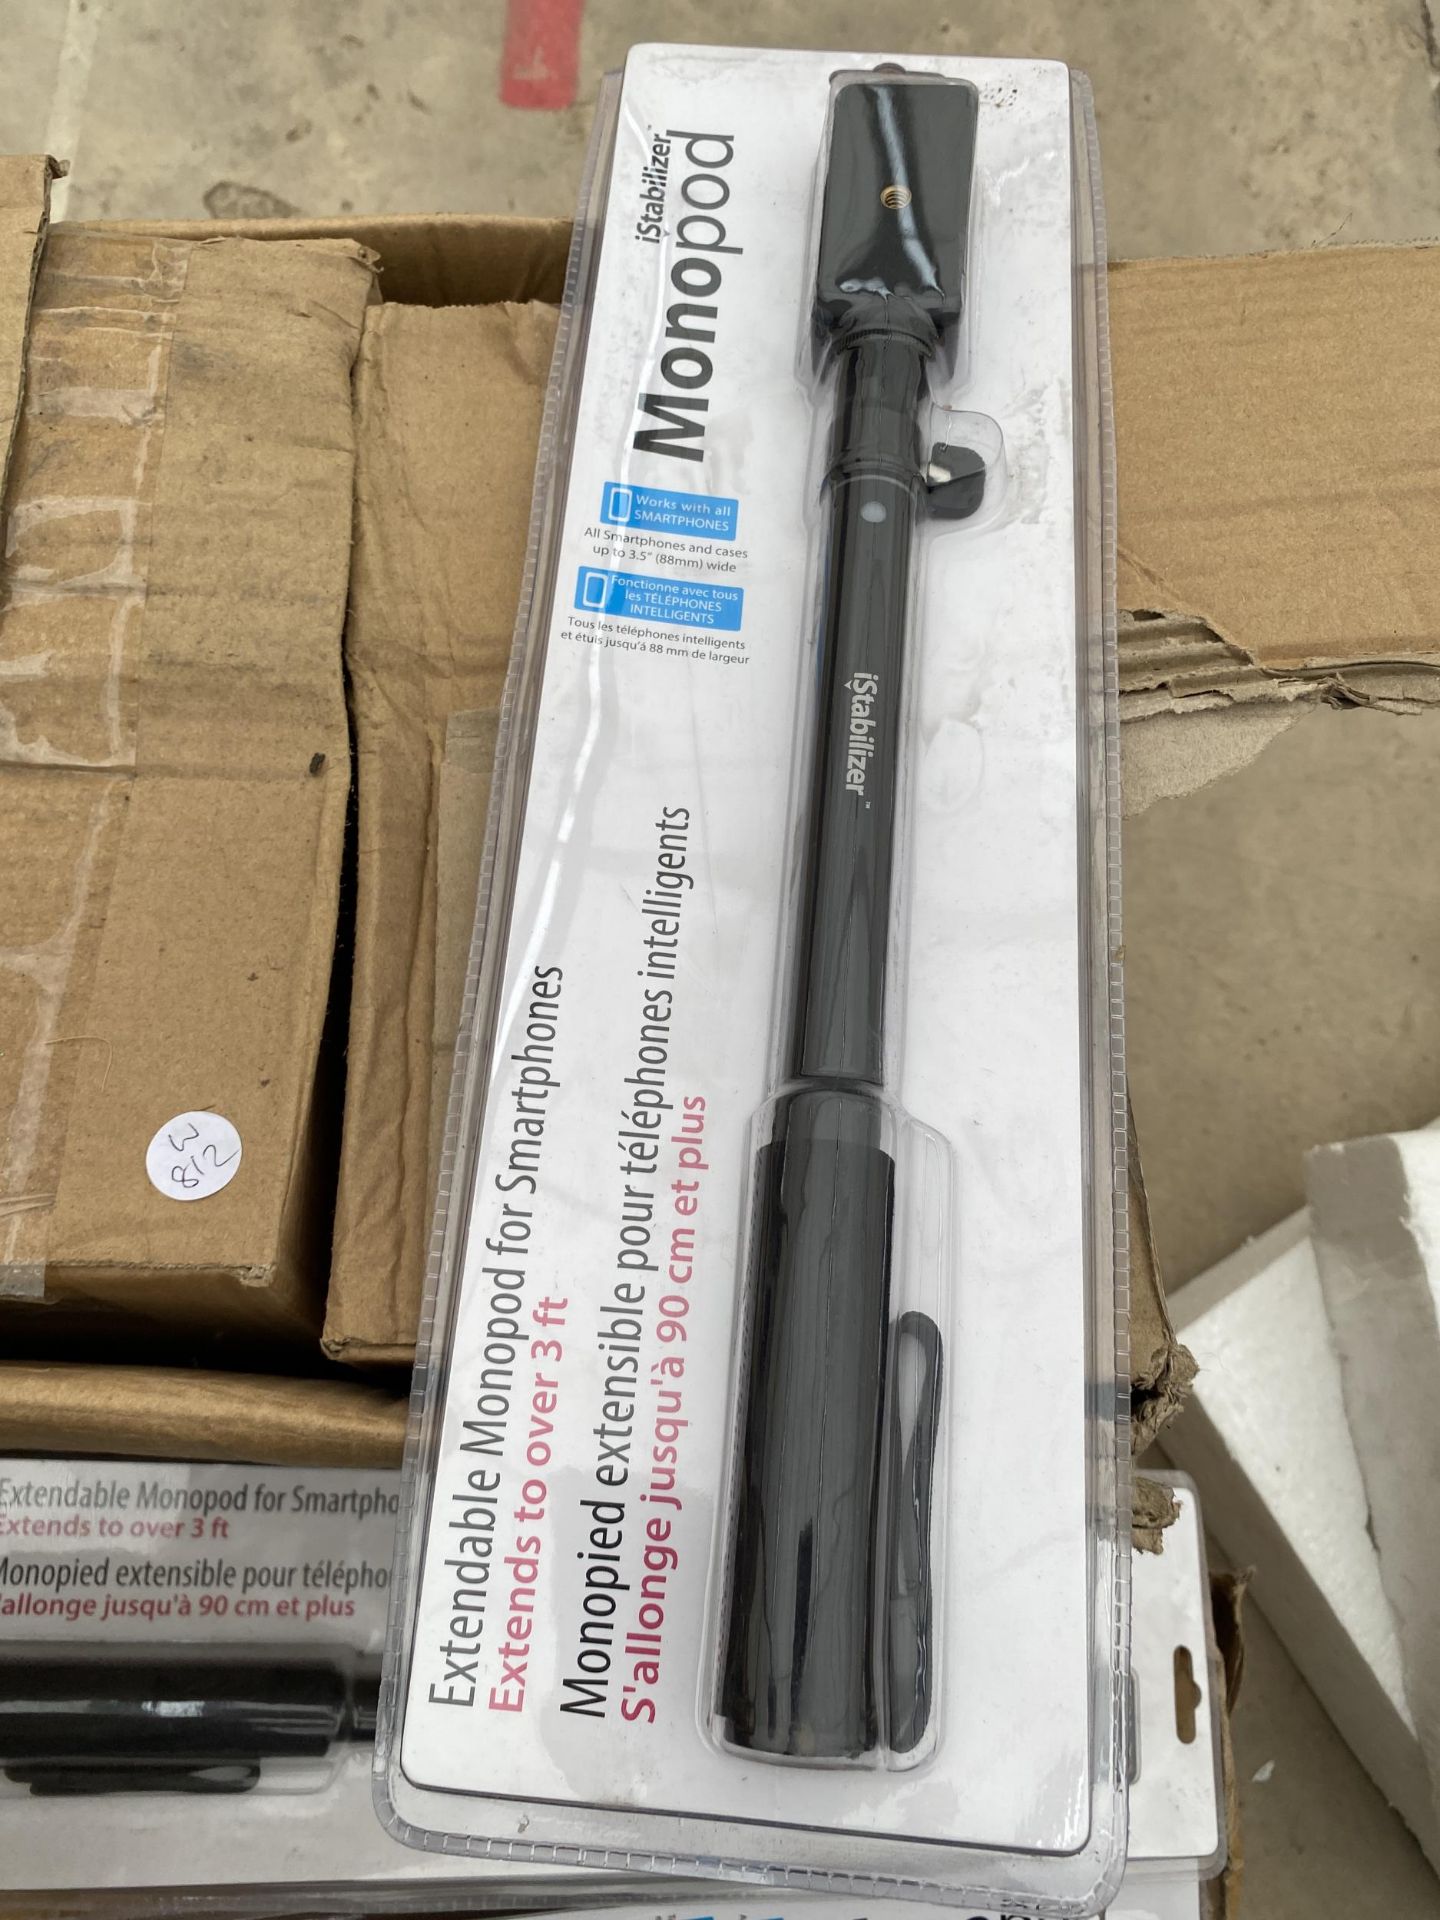 A LARGE QUANTITY OF NEW AND BOXED ISTABILIZER MONOPOD SELFIE STICKS - Image 3 of 3